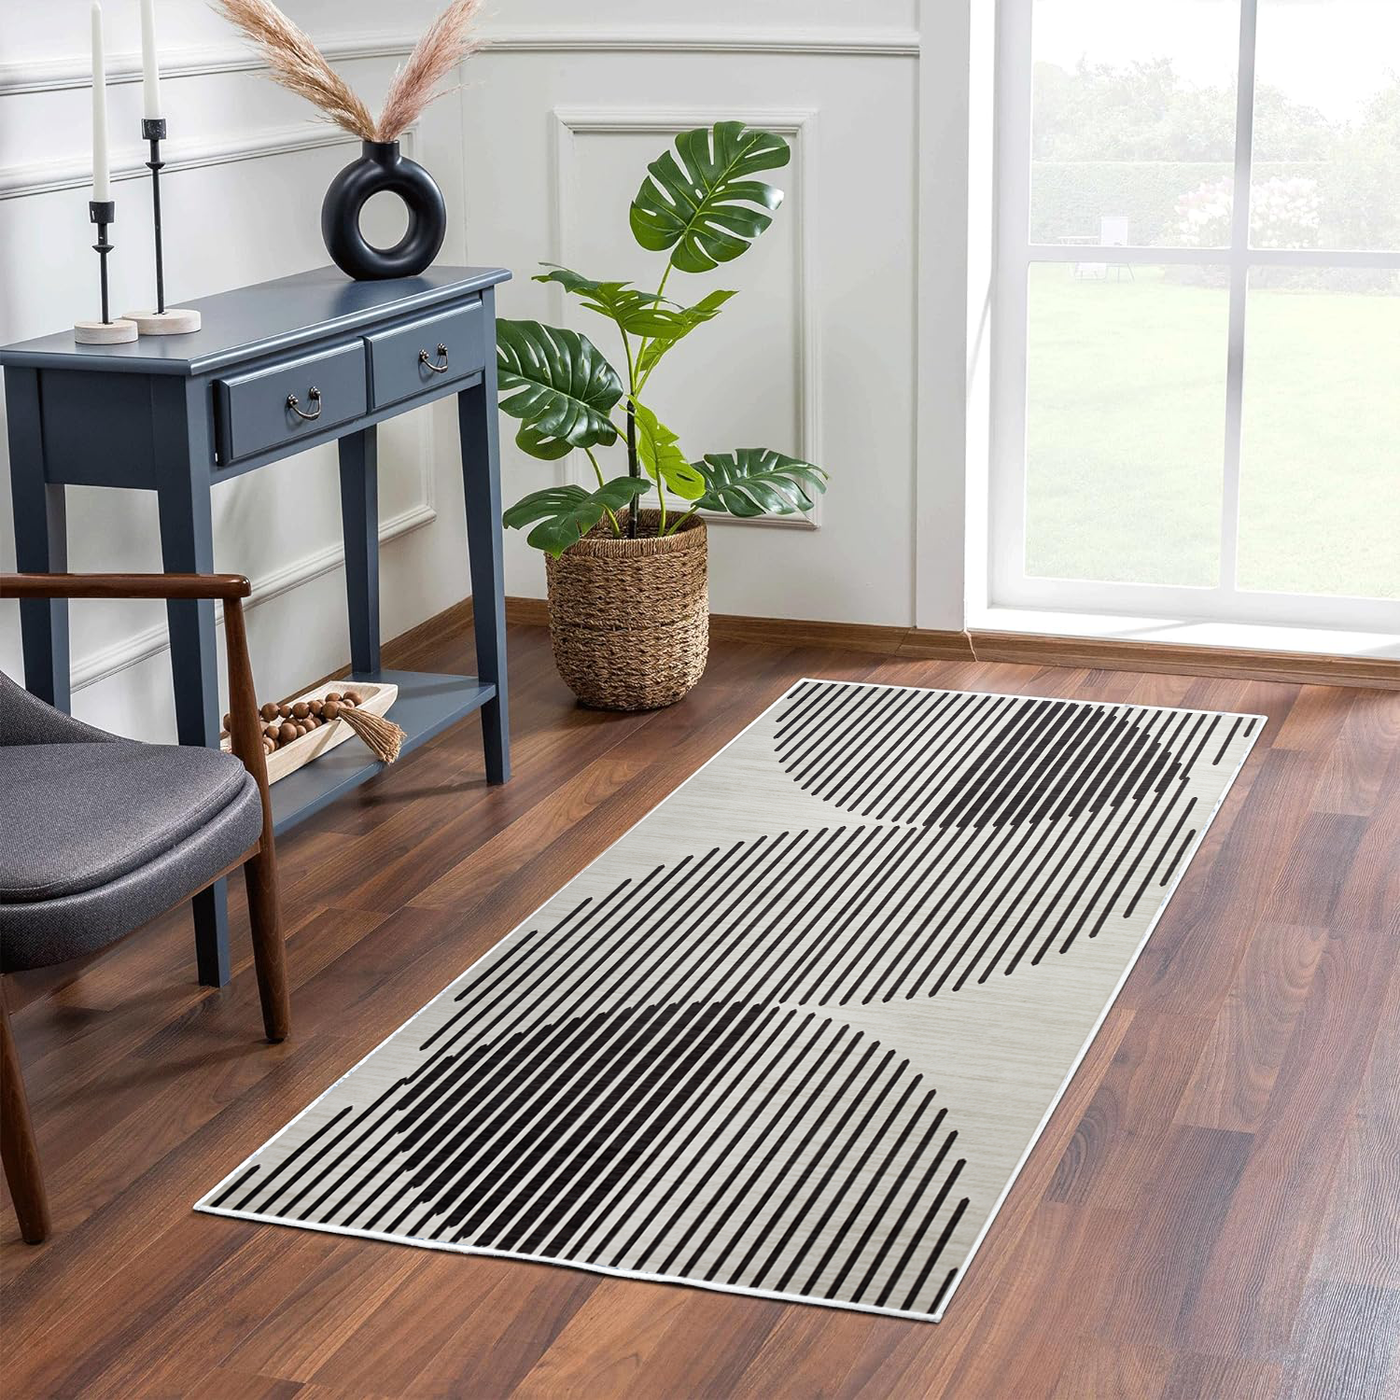 Striped Pattern Printed Rug For Living Room